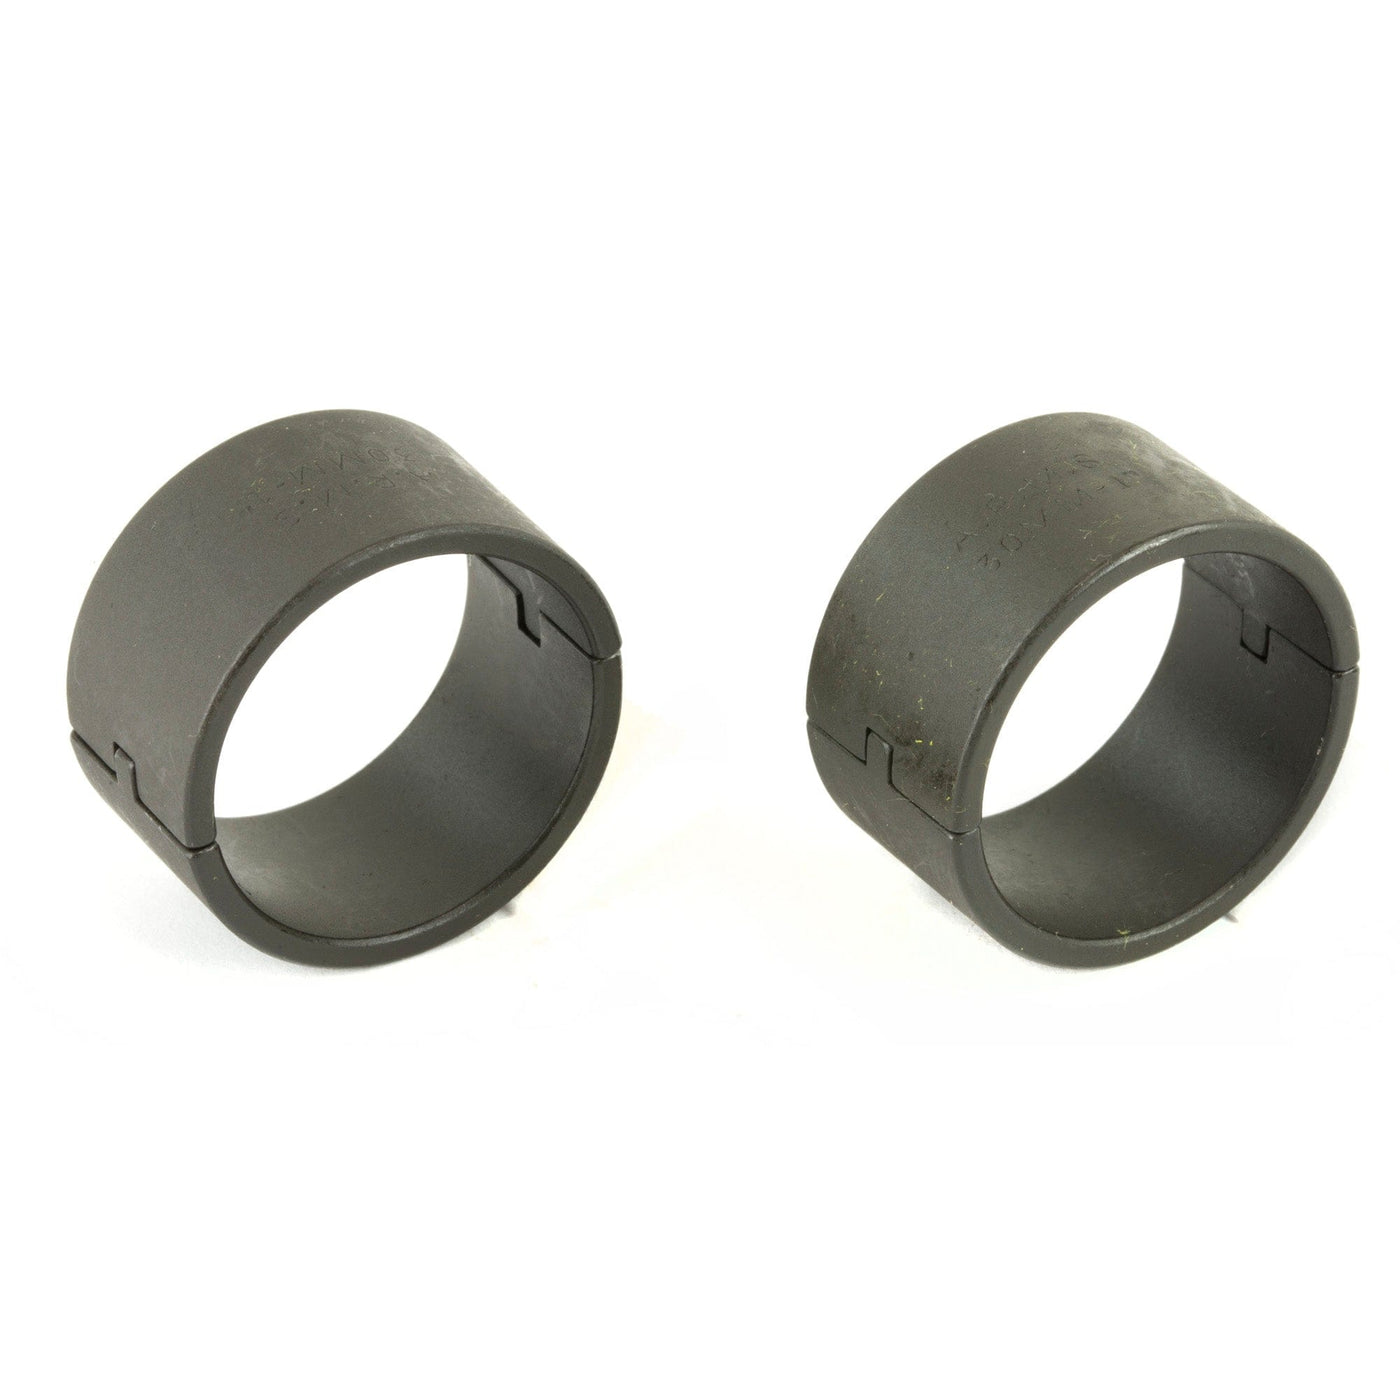 A.R.M.S., Inc. Arms Ring Inserts 30mm - 1 Inch Scope Mounts